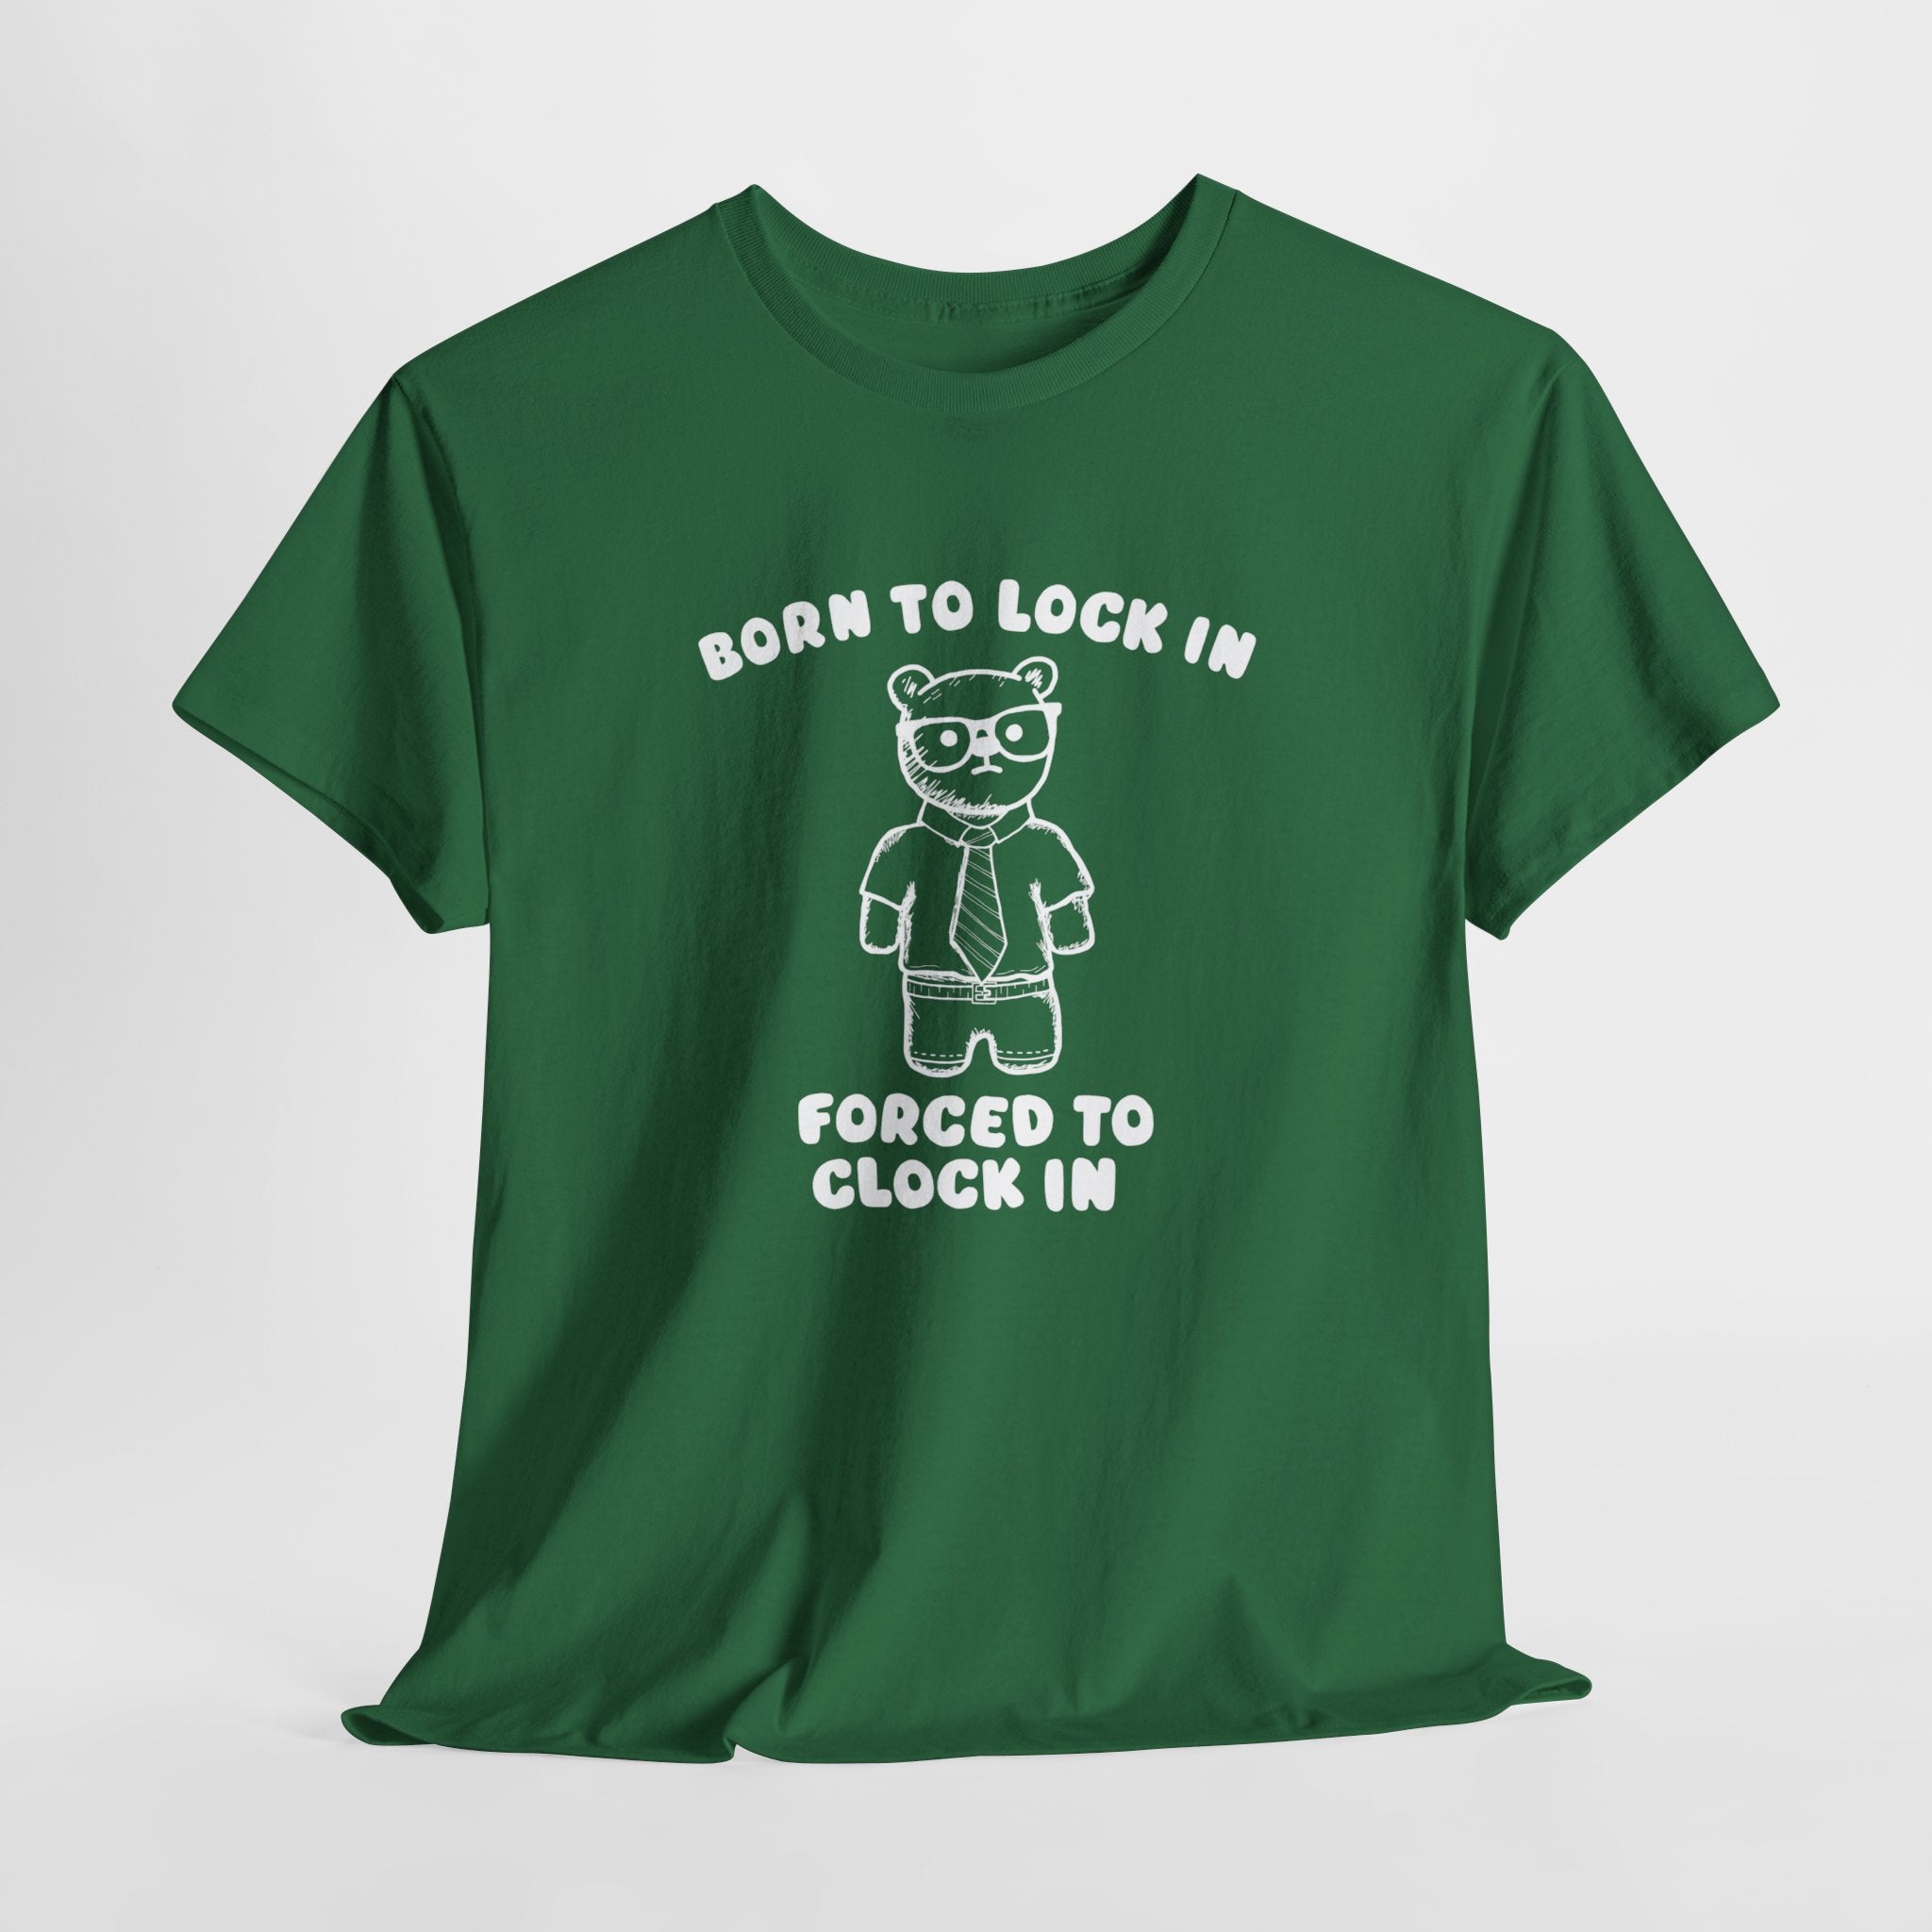 Born to Lock In Forced to Clock In Shirt